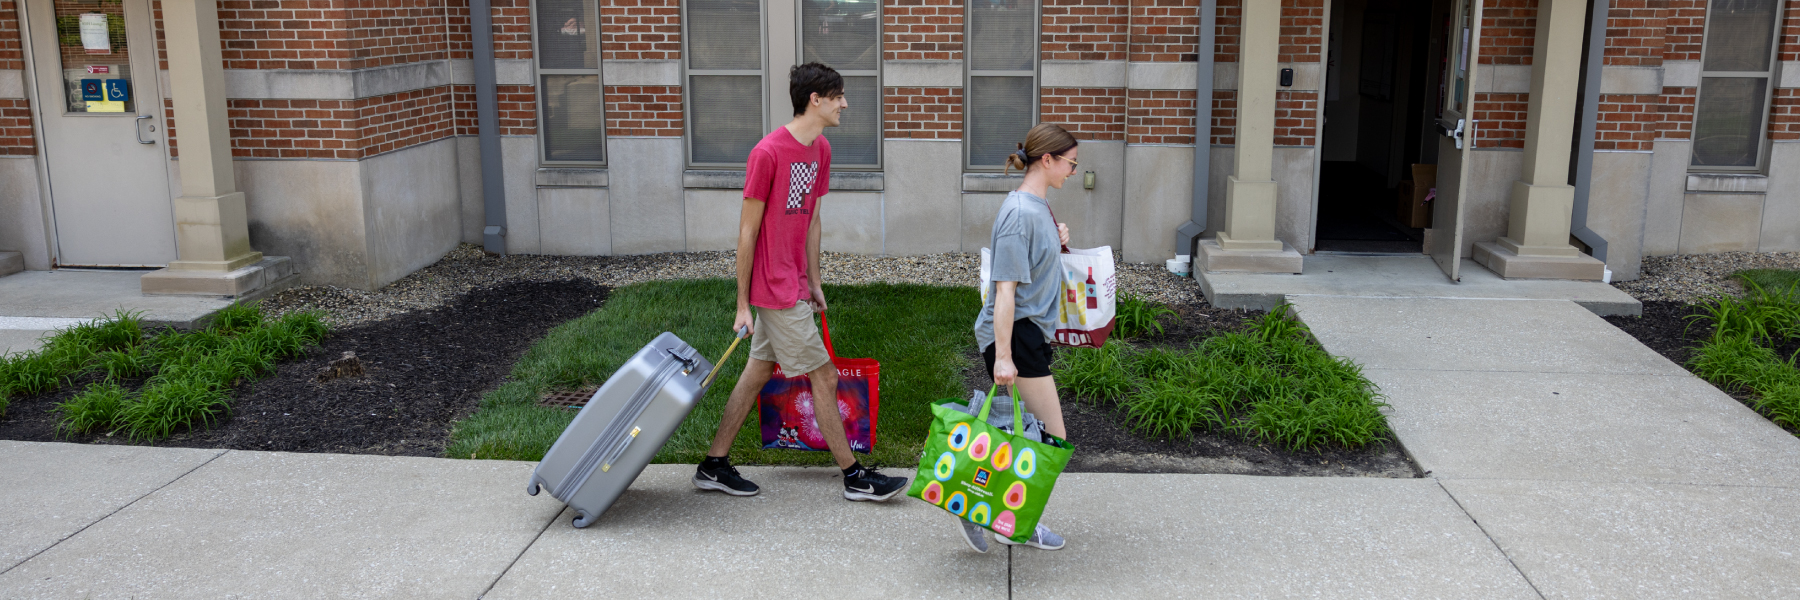 Student bringing things to their building for housing move-in.